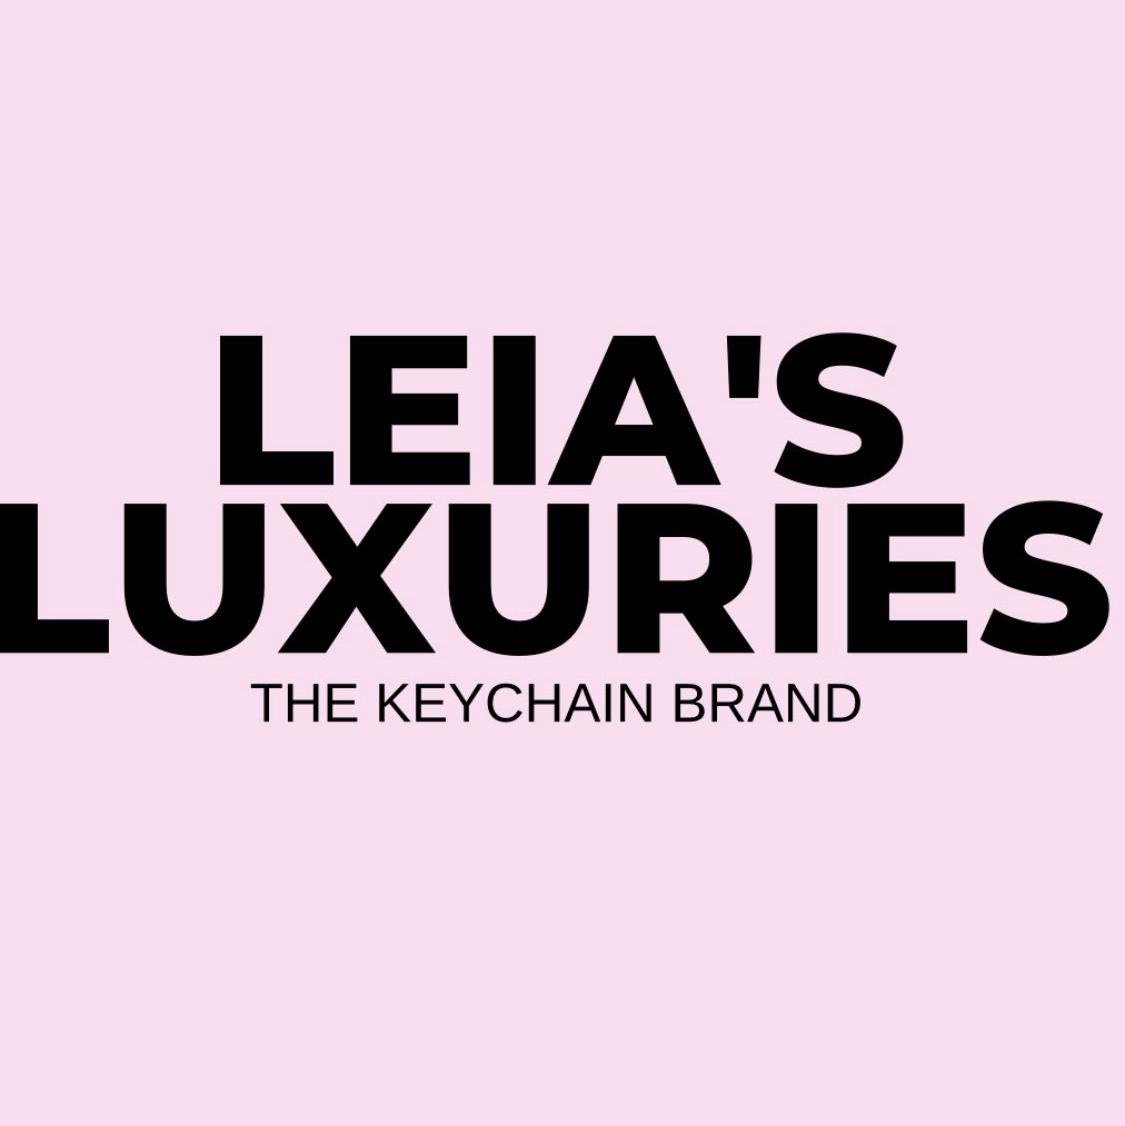 Leias Luxuries 's images